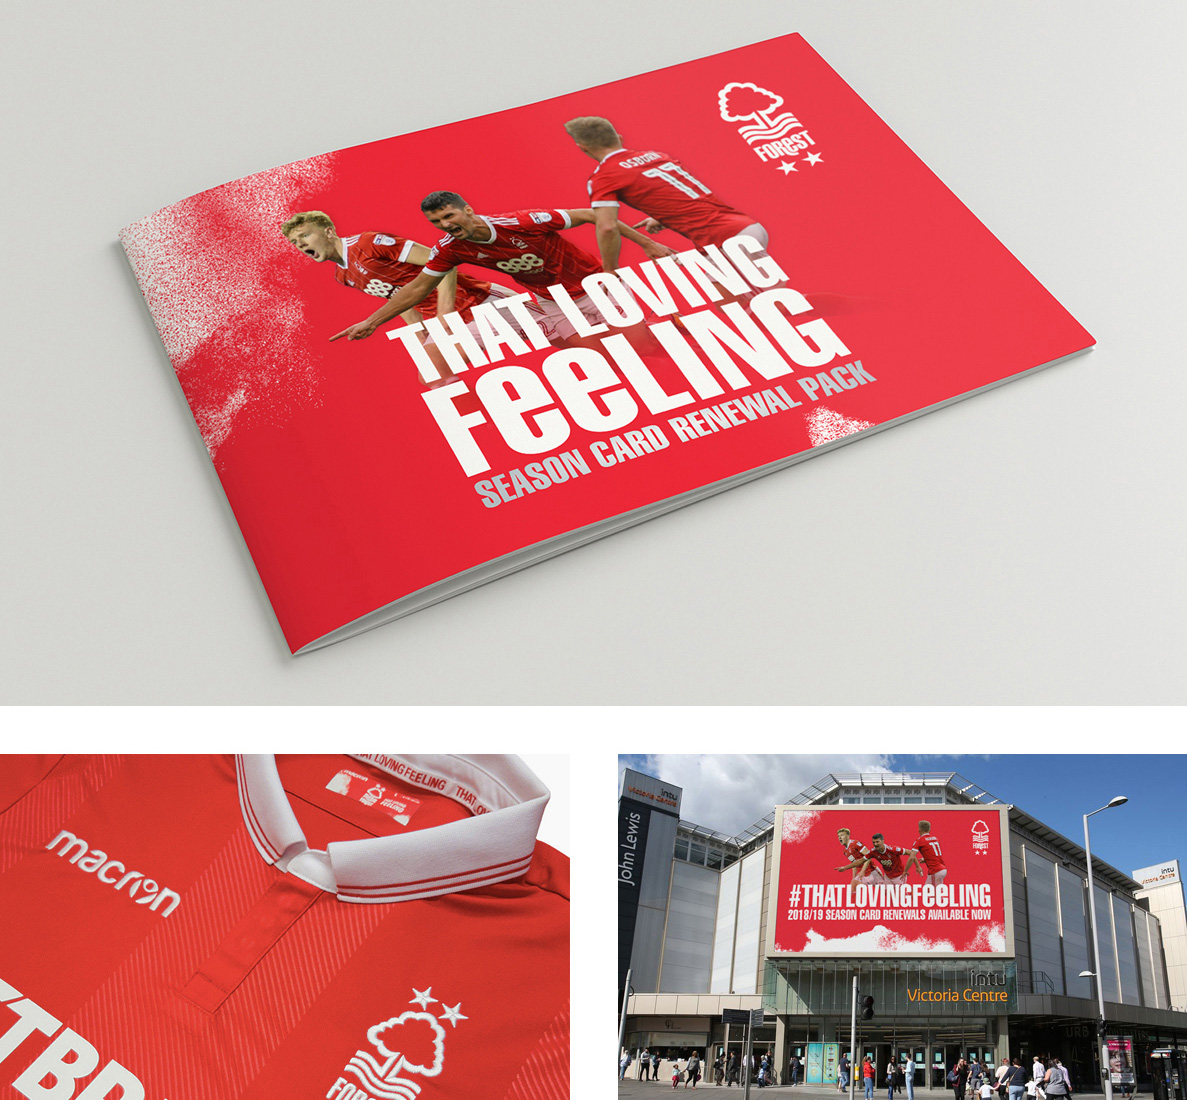 Nottingham Forest 'That Loving Feeling' Marketing Campaign and Season Card Renewal Pack Graphic Design by Kristian Goddar